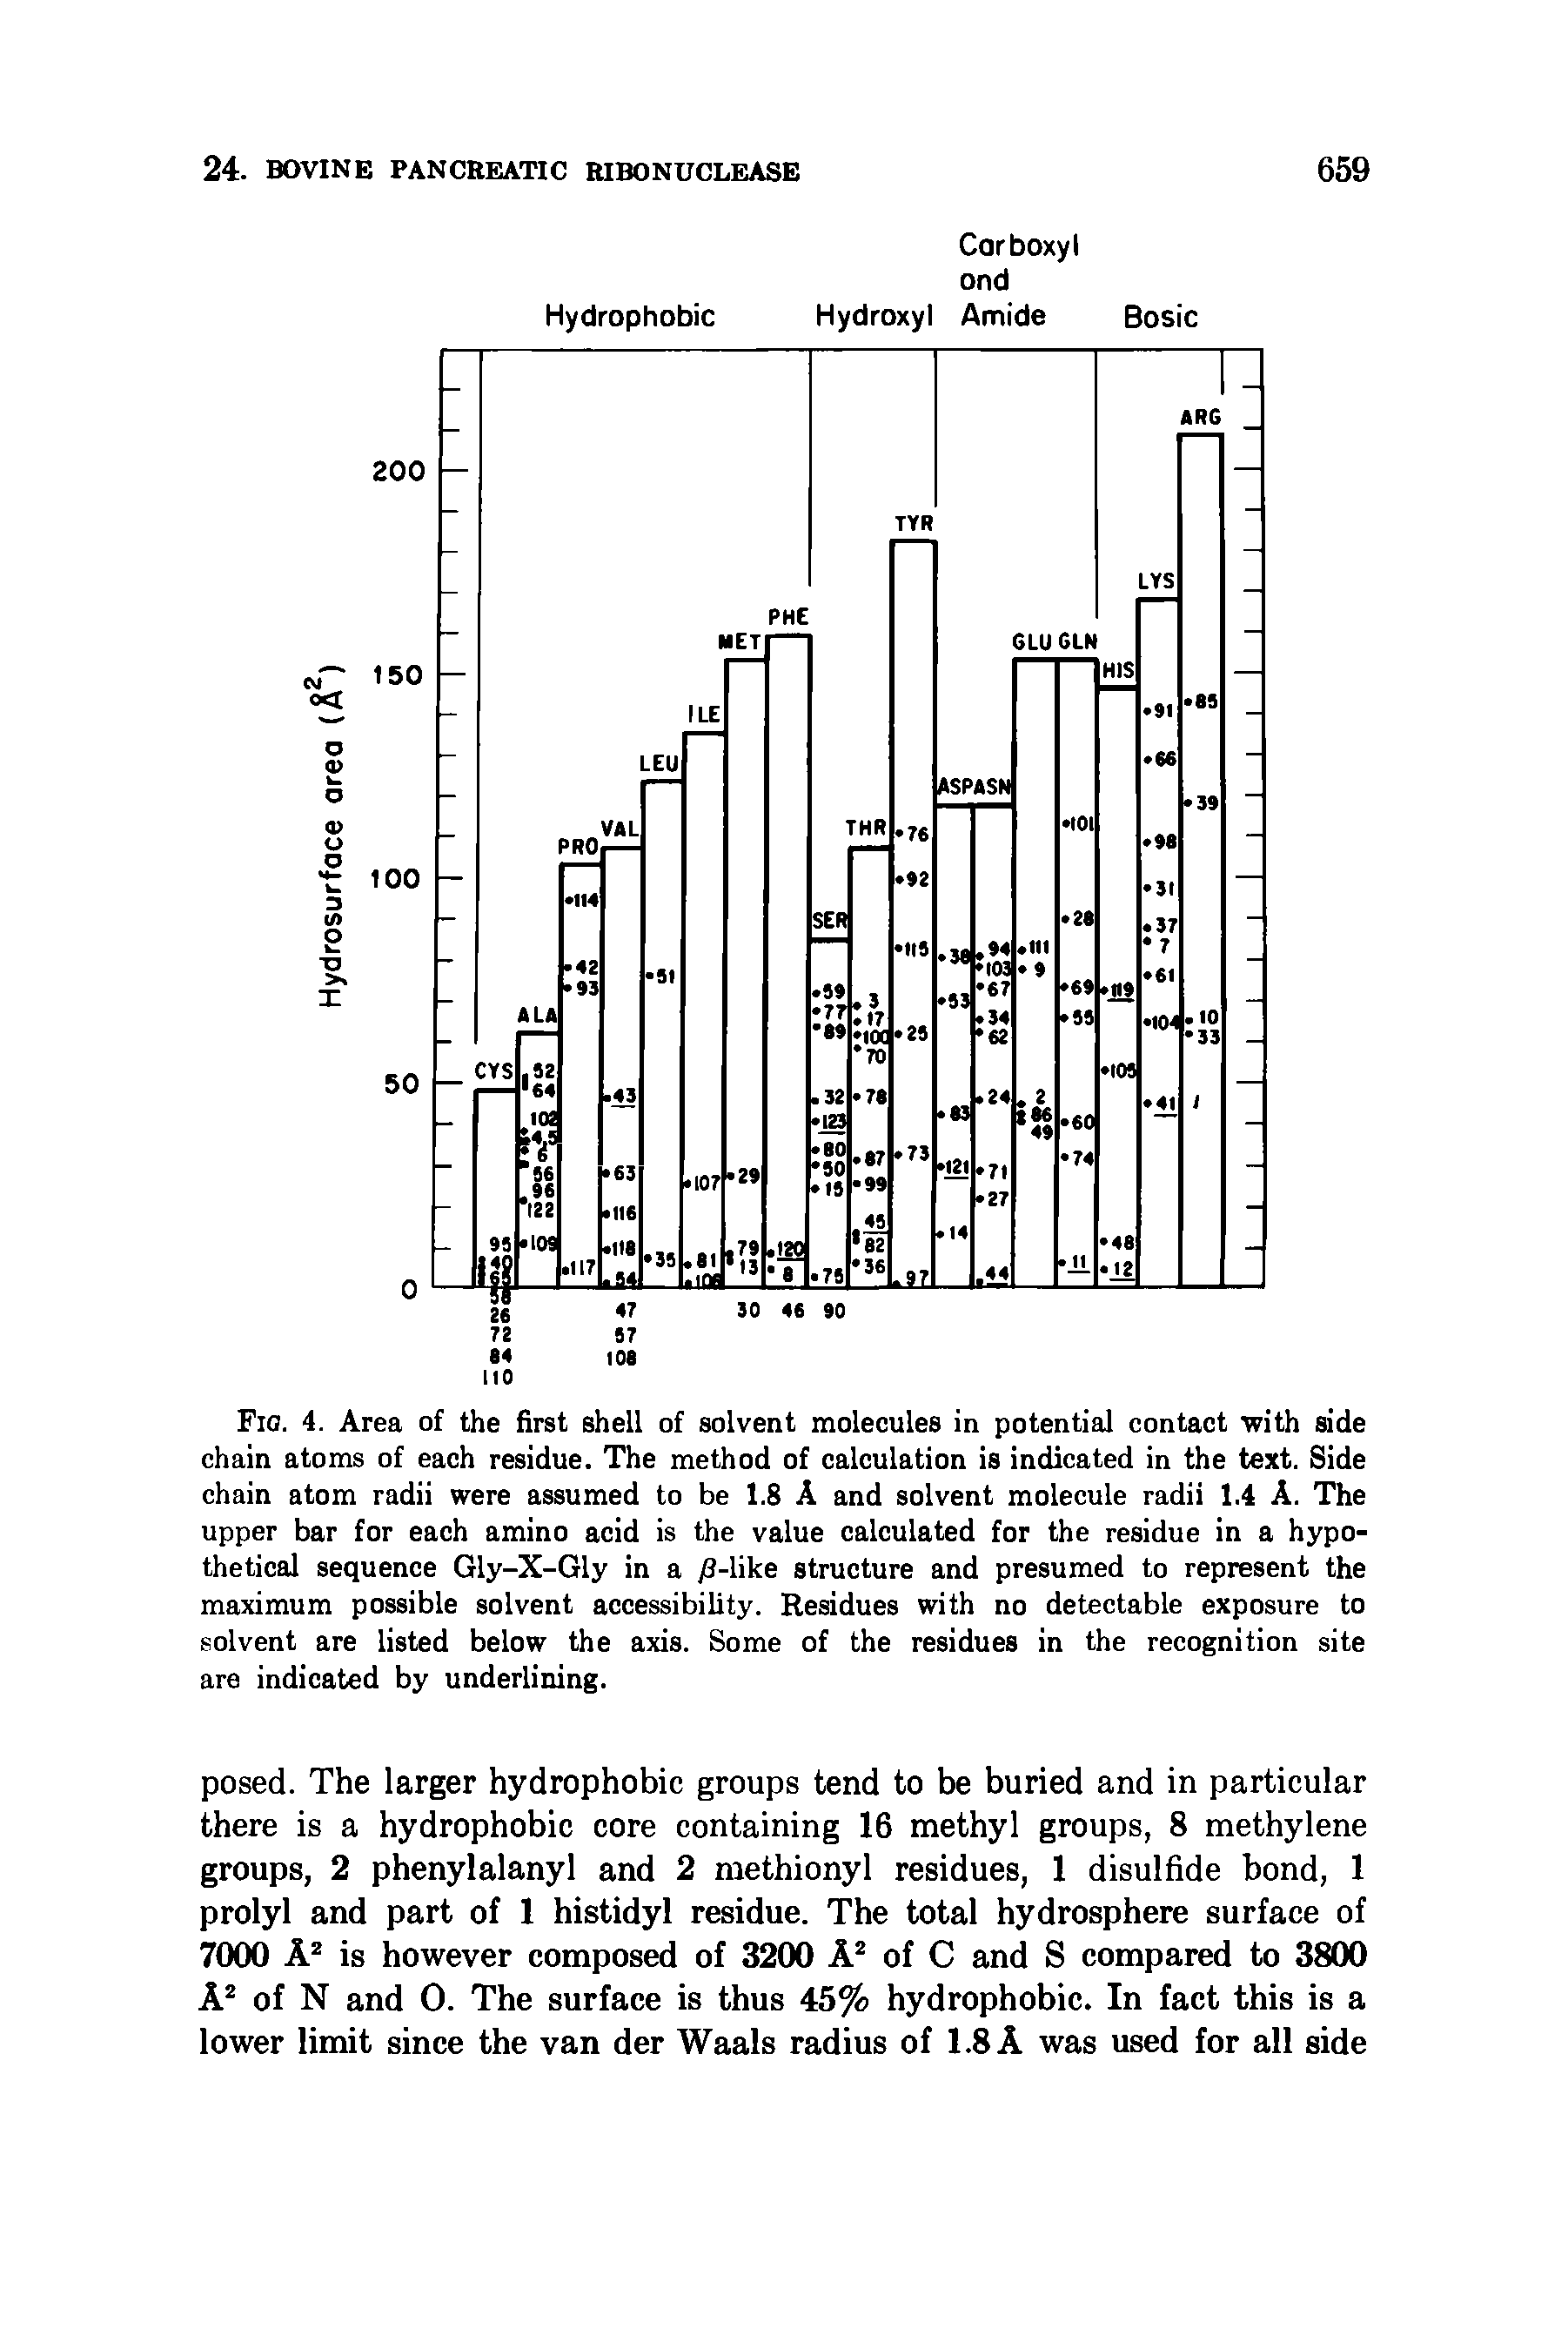 Fig. 4. Area of the first shell of solvent molecules in potential contact with side chain atoms of each residue. The method of calculation is indicated in the text. Side chain atom radii were assumed to be 1.8 A and solvent molecule radii 1.4 A. The upper bar for each amino acid is the value calculated for the residue in a hypothetical sequence Gly-X-Gly in a /3-like structure and presumed to represent the maximum possible solvent accessibility. Residues with no detectable exposure to solvent are listed below the axis. Some of the residues in the recognition site are indicated by underlining.